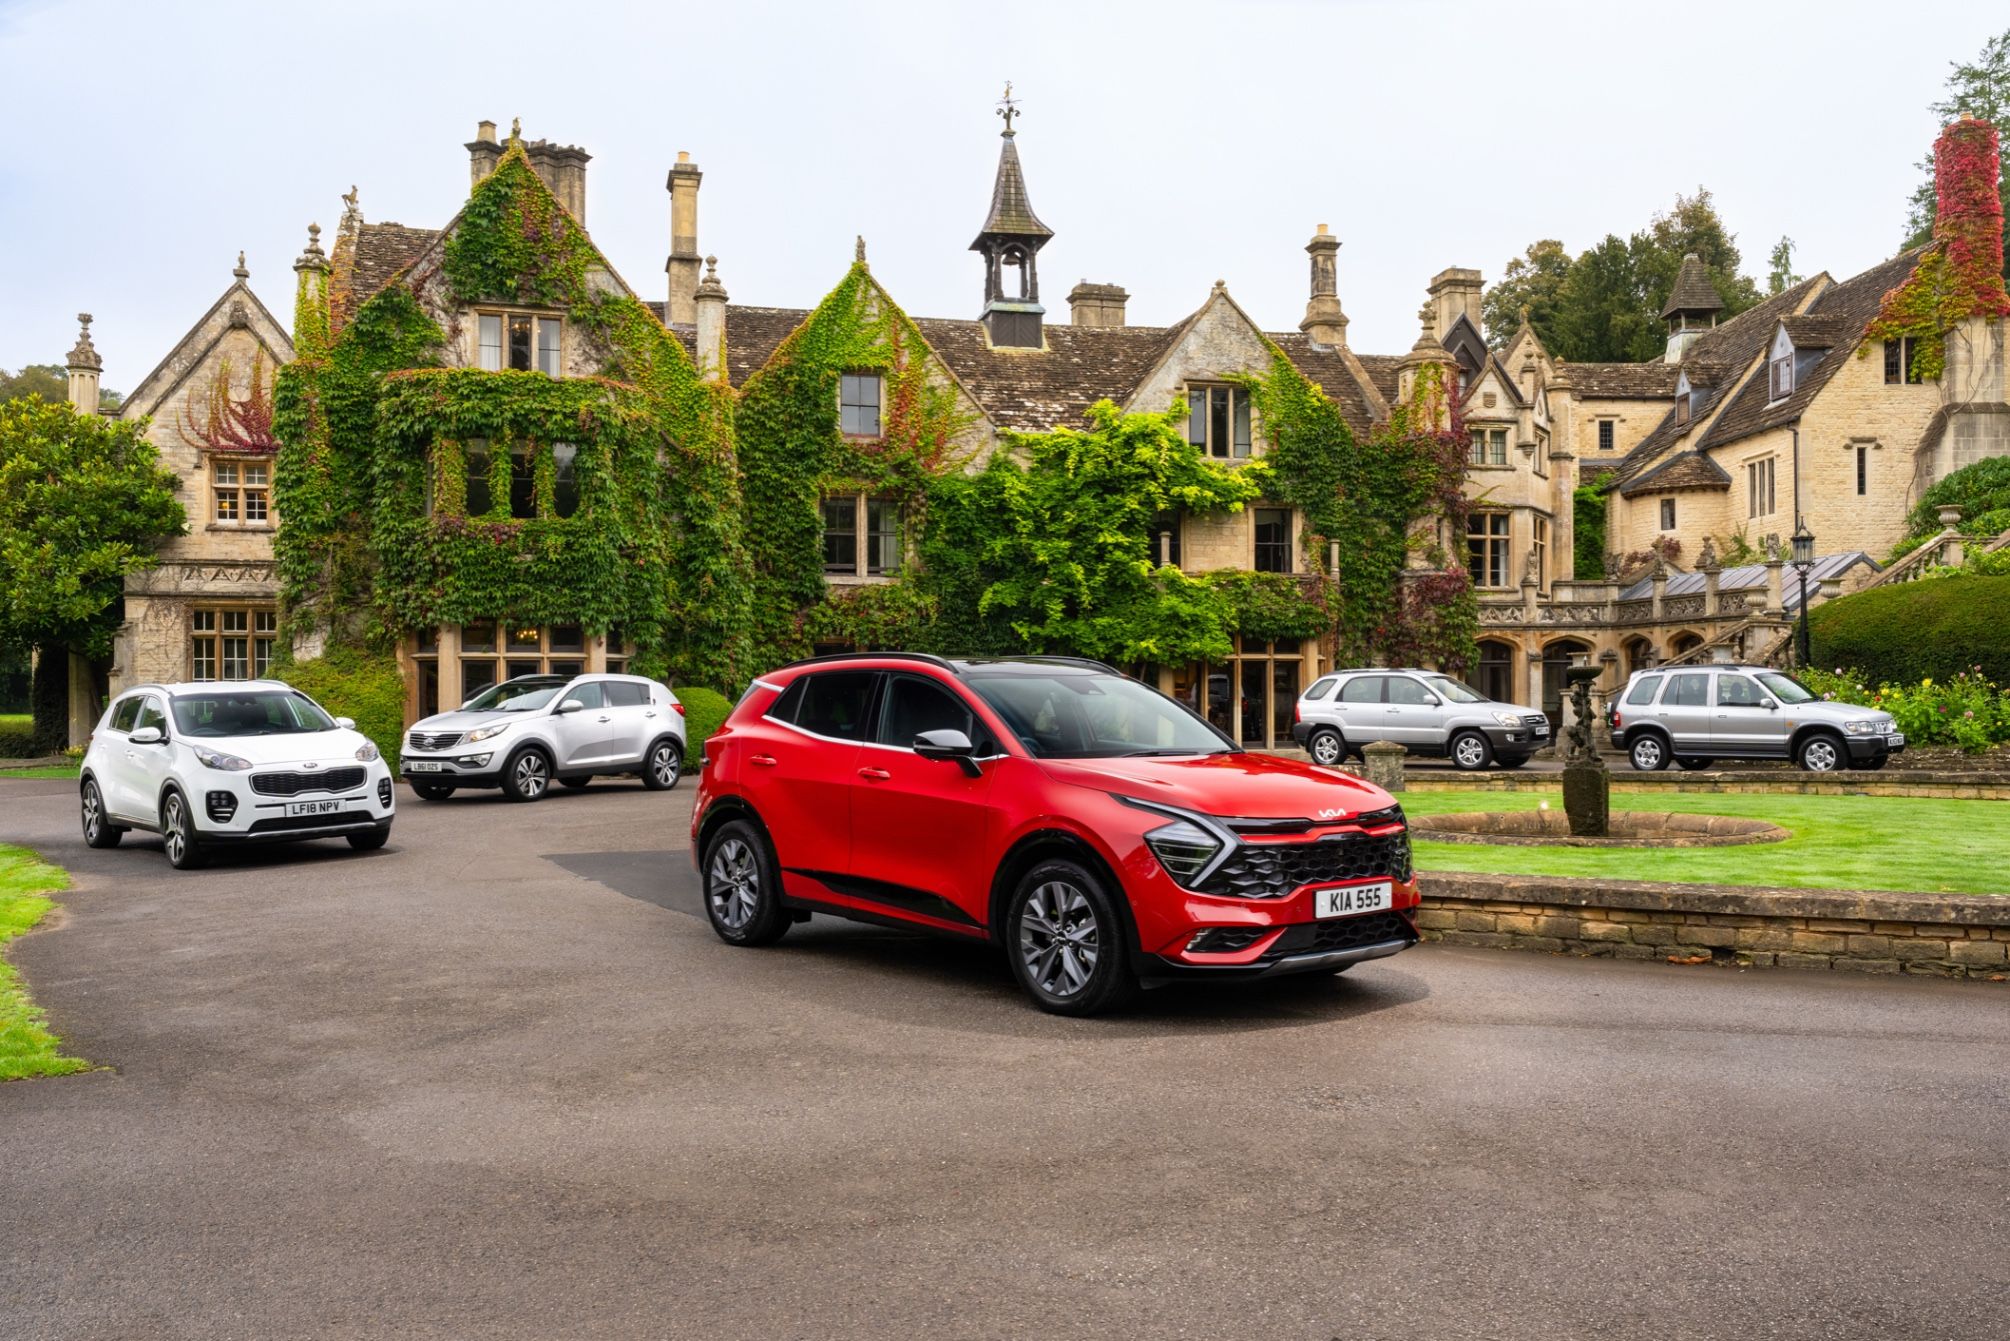 POPULAR: The Sportage has enjoyed five generations of success